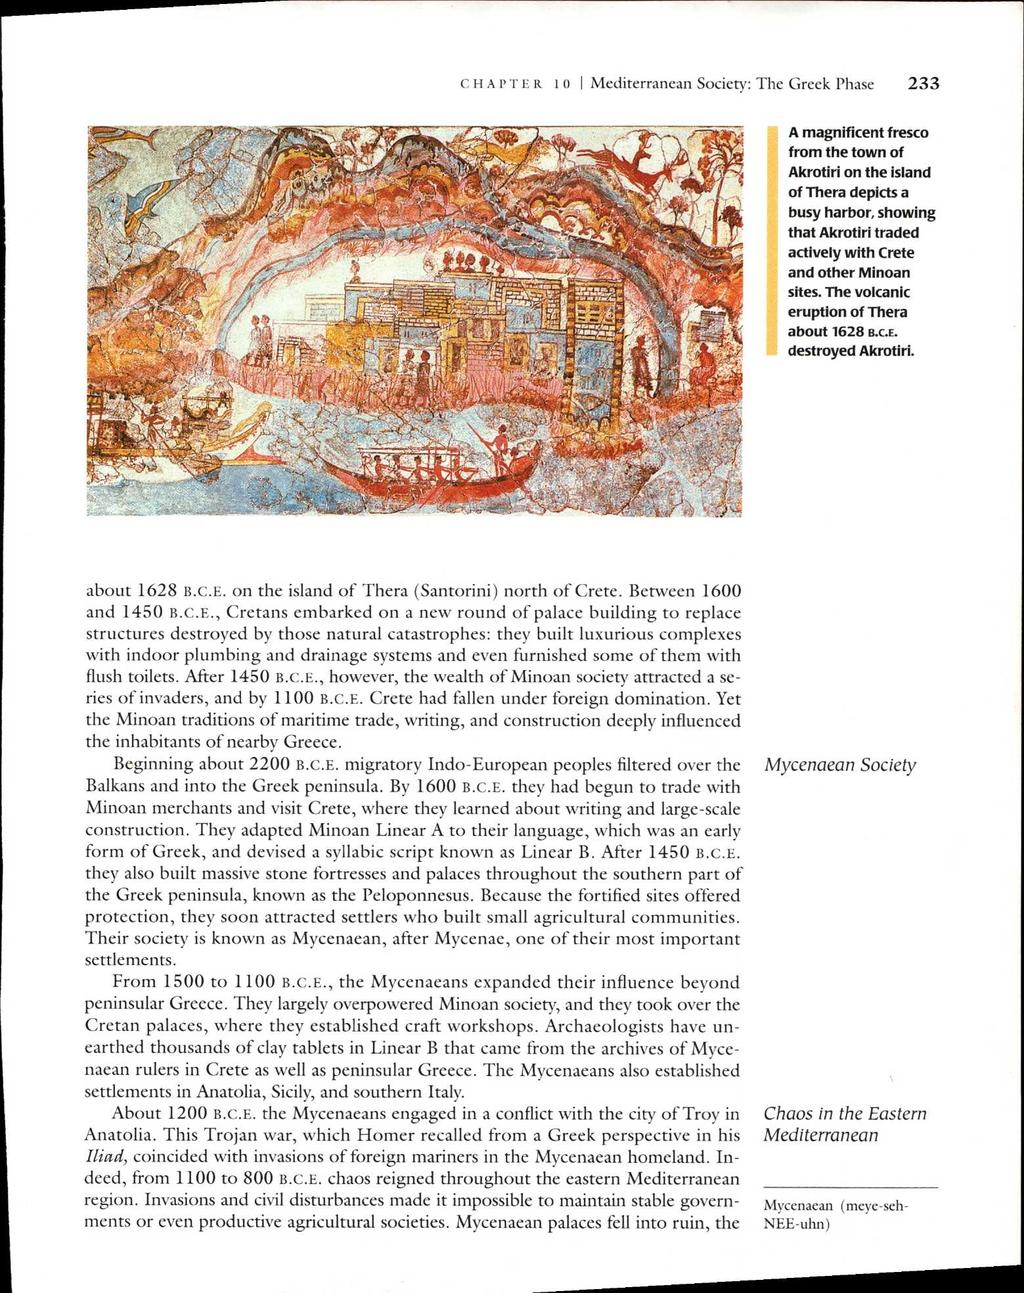 CHAPTER 10 I Mediterranean Society: The Greek Phase 233 A magnificent fresco from the town of Akrotiri on the island of Thera depicts a busy harbor, showing that Akrotiri traded actively with Crete